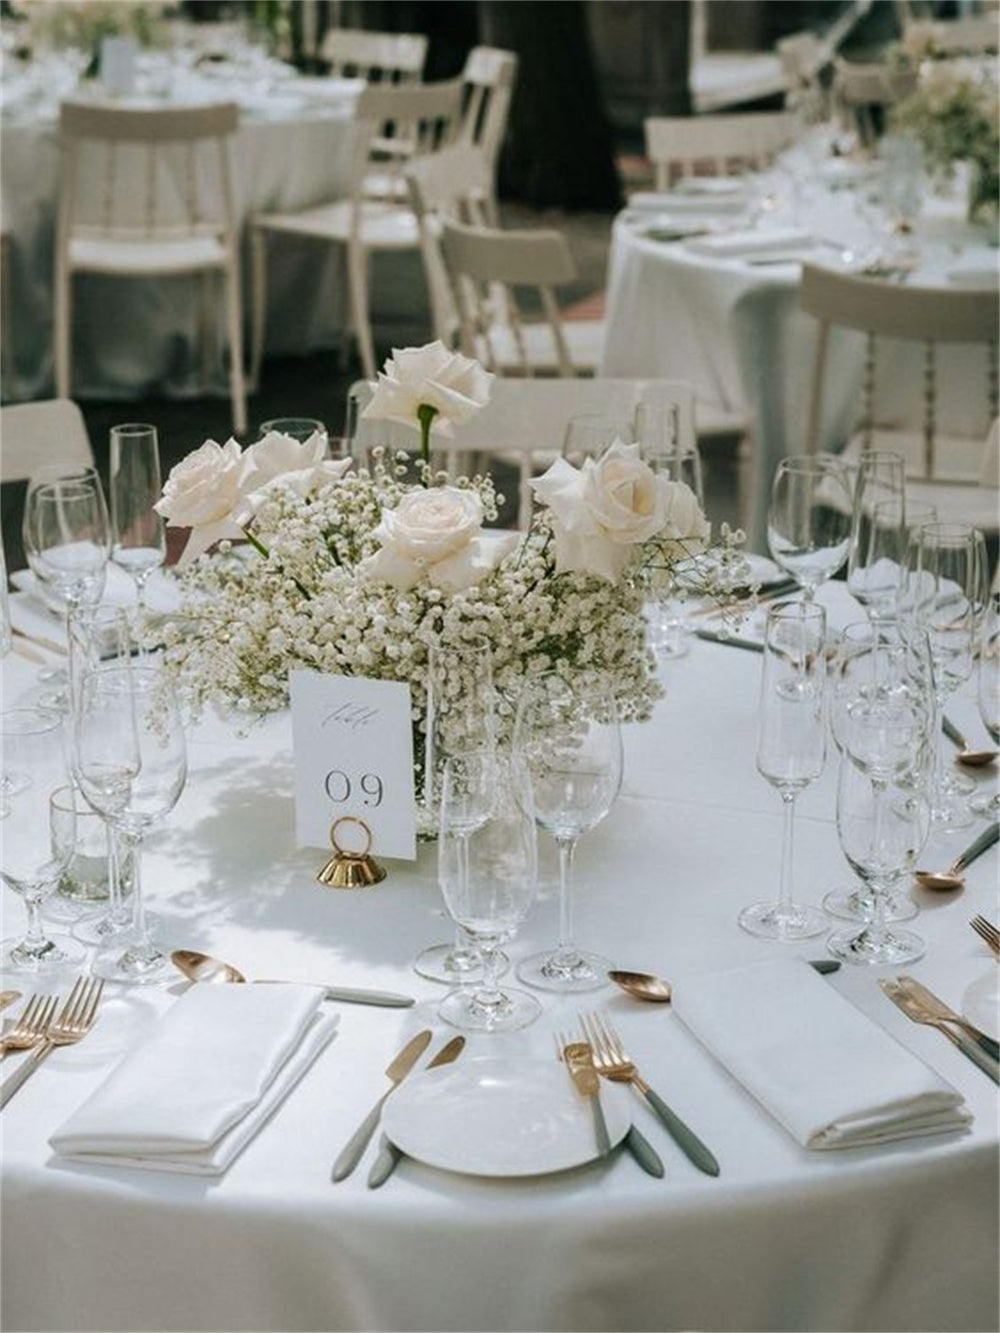 Baby's Breath Wedding Centerpieces with Flowers